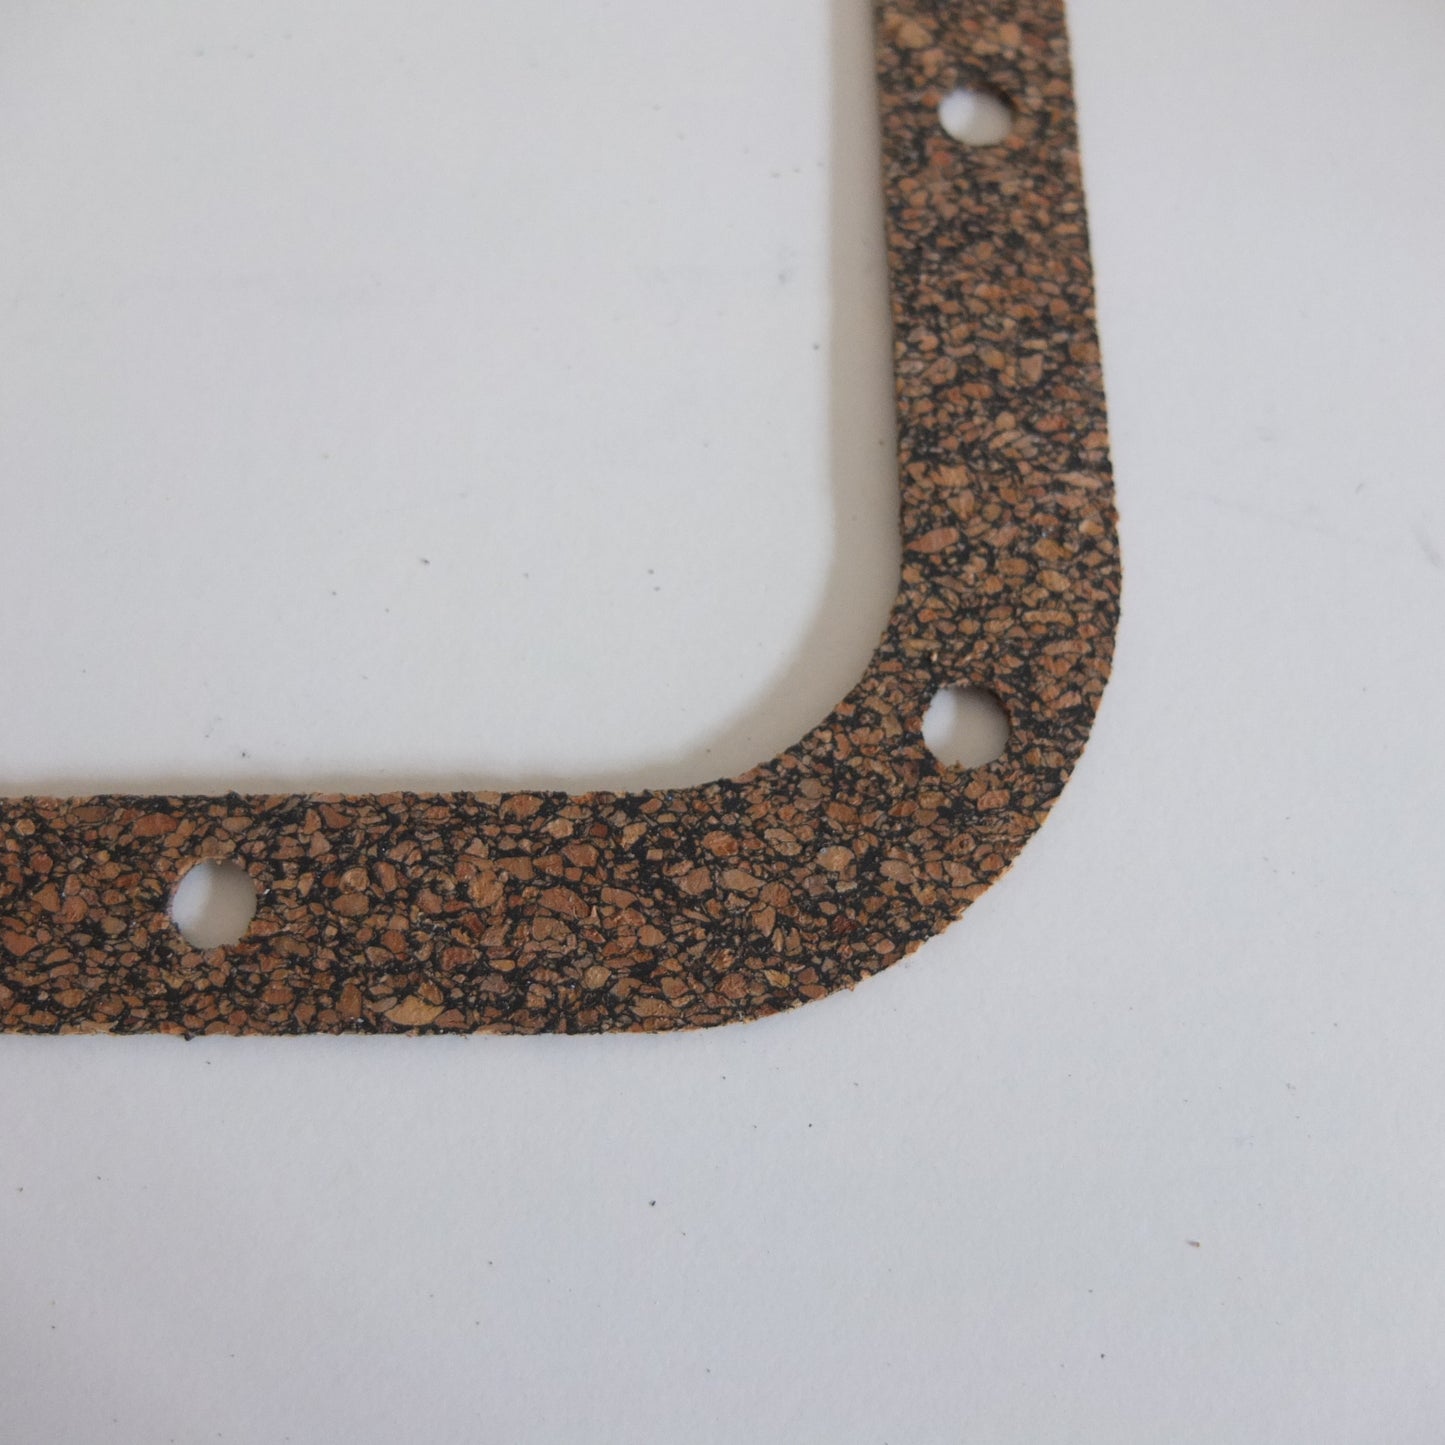 P13/191 Early S7 Sump gasket (cork)